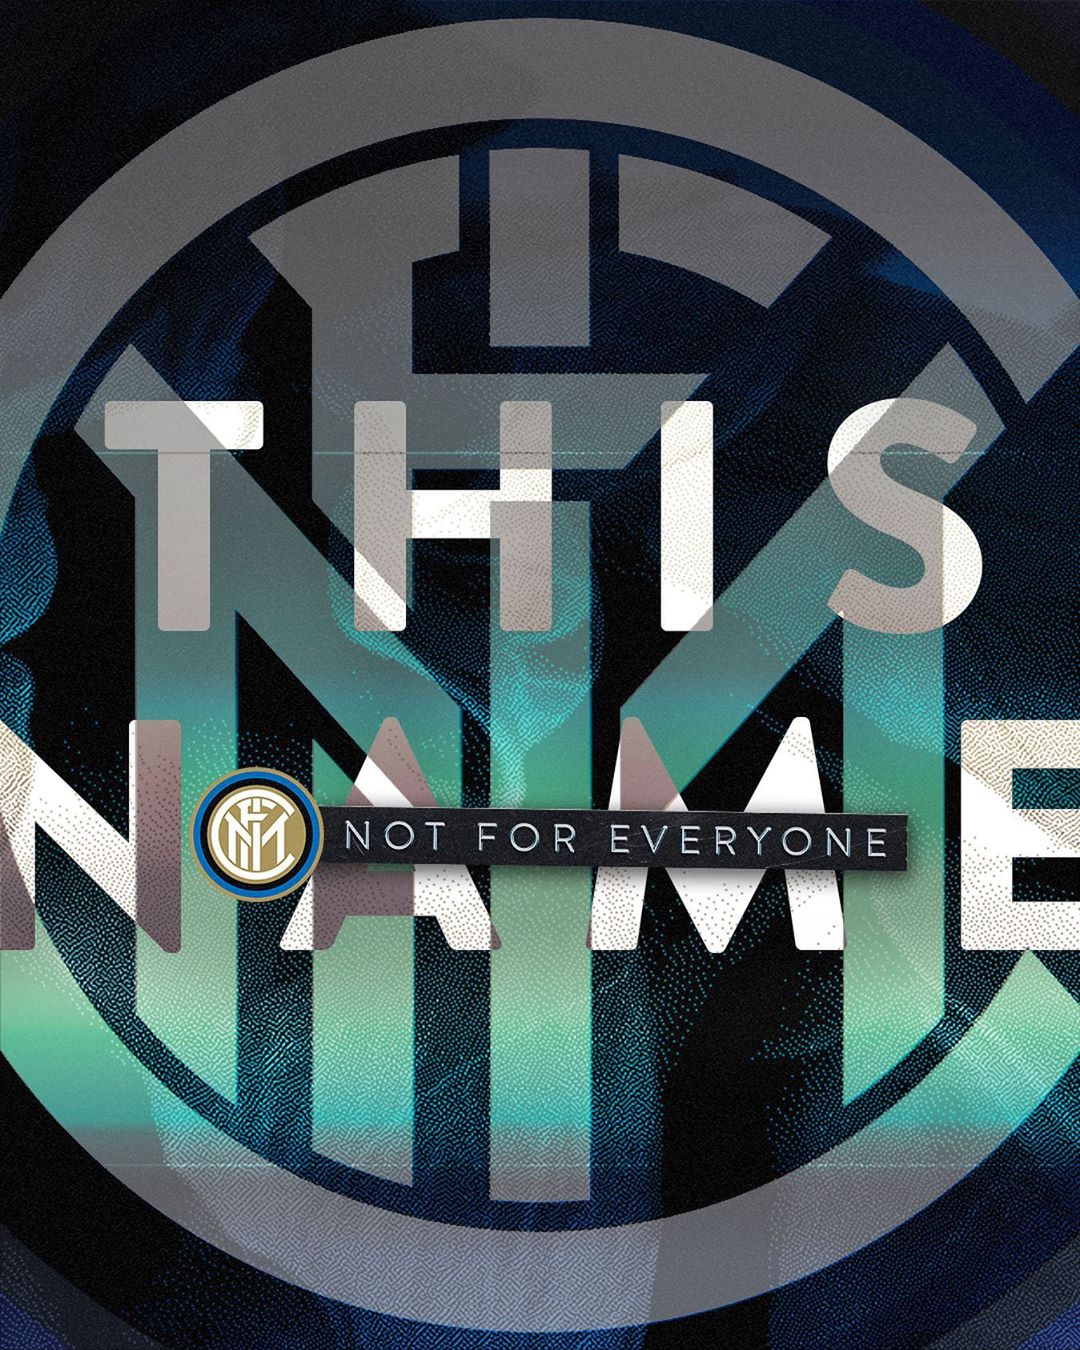 Inter Not for everyone